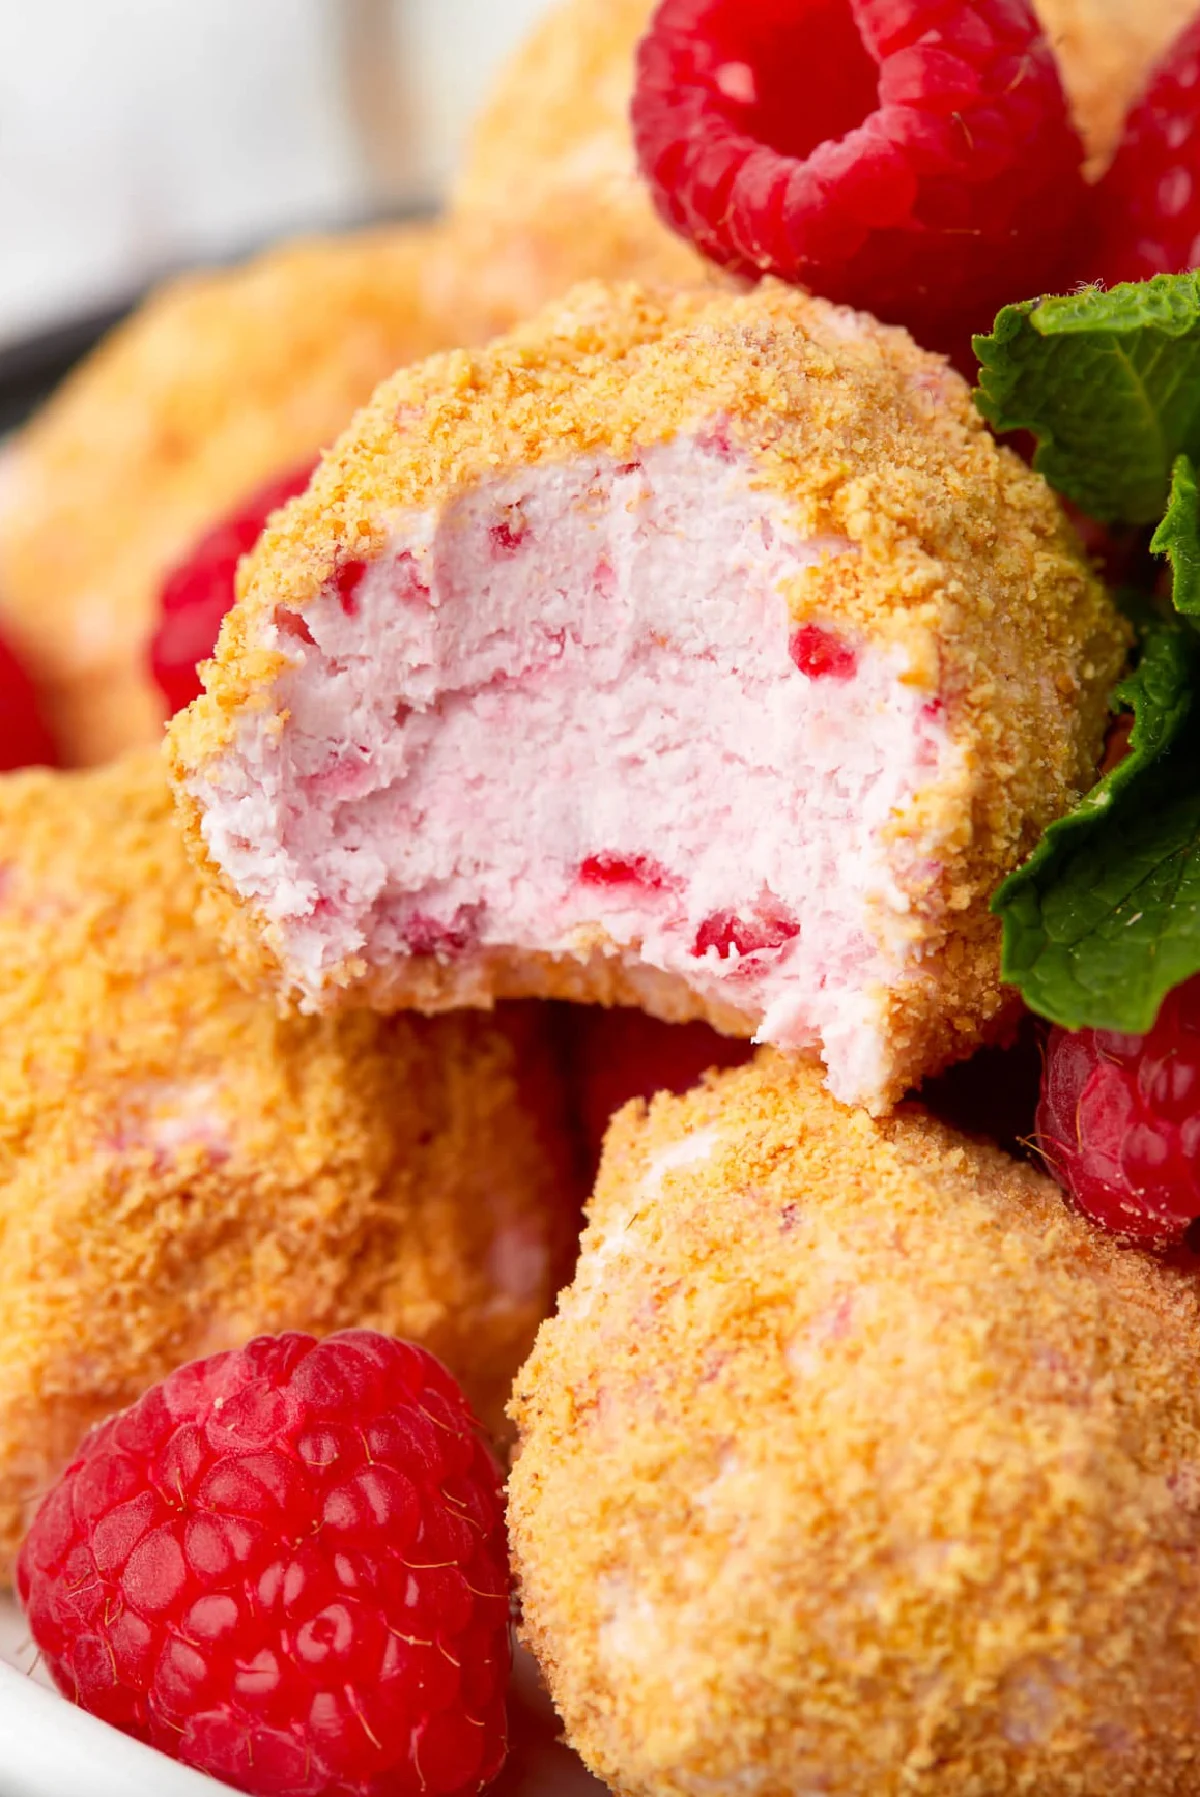 no bake raspberry cheesecake bites one with bite taken out of it